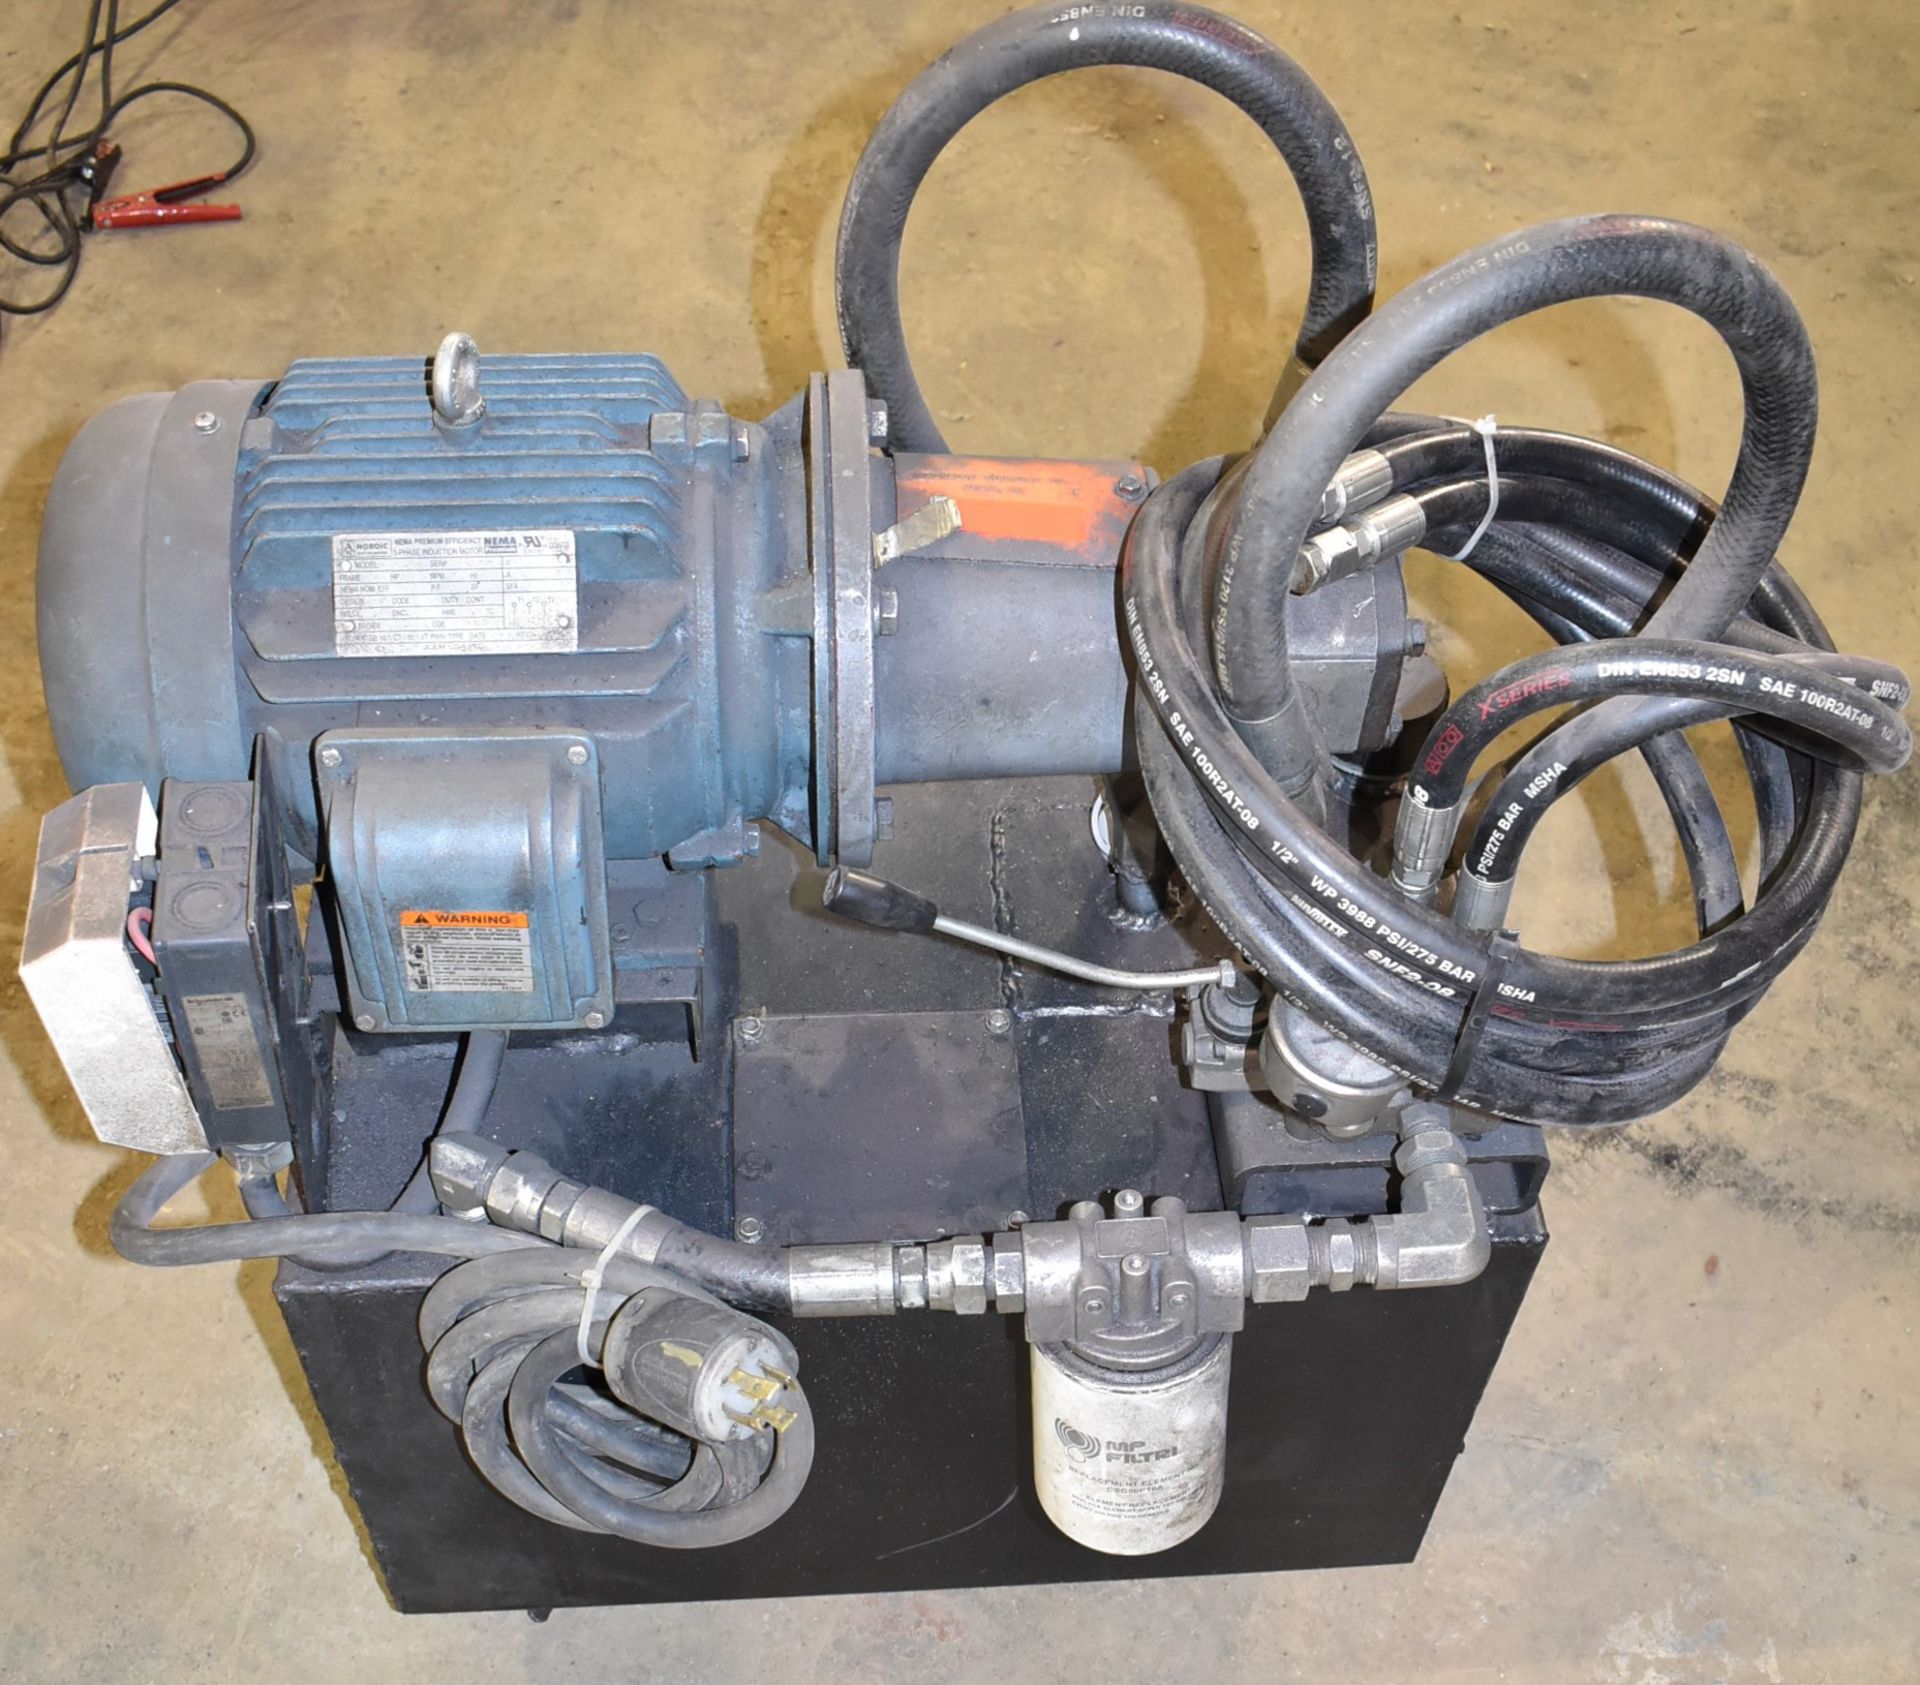 PORTABLE HYDRAULIC POWER PACK WITH 5 HP MOTOR, S/N N/A - Image 2 of 3